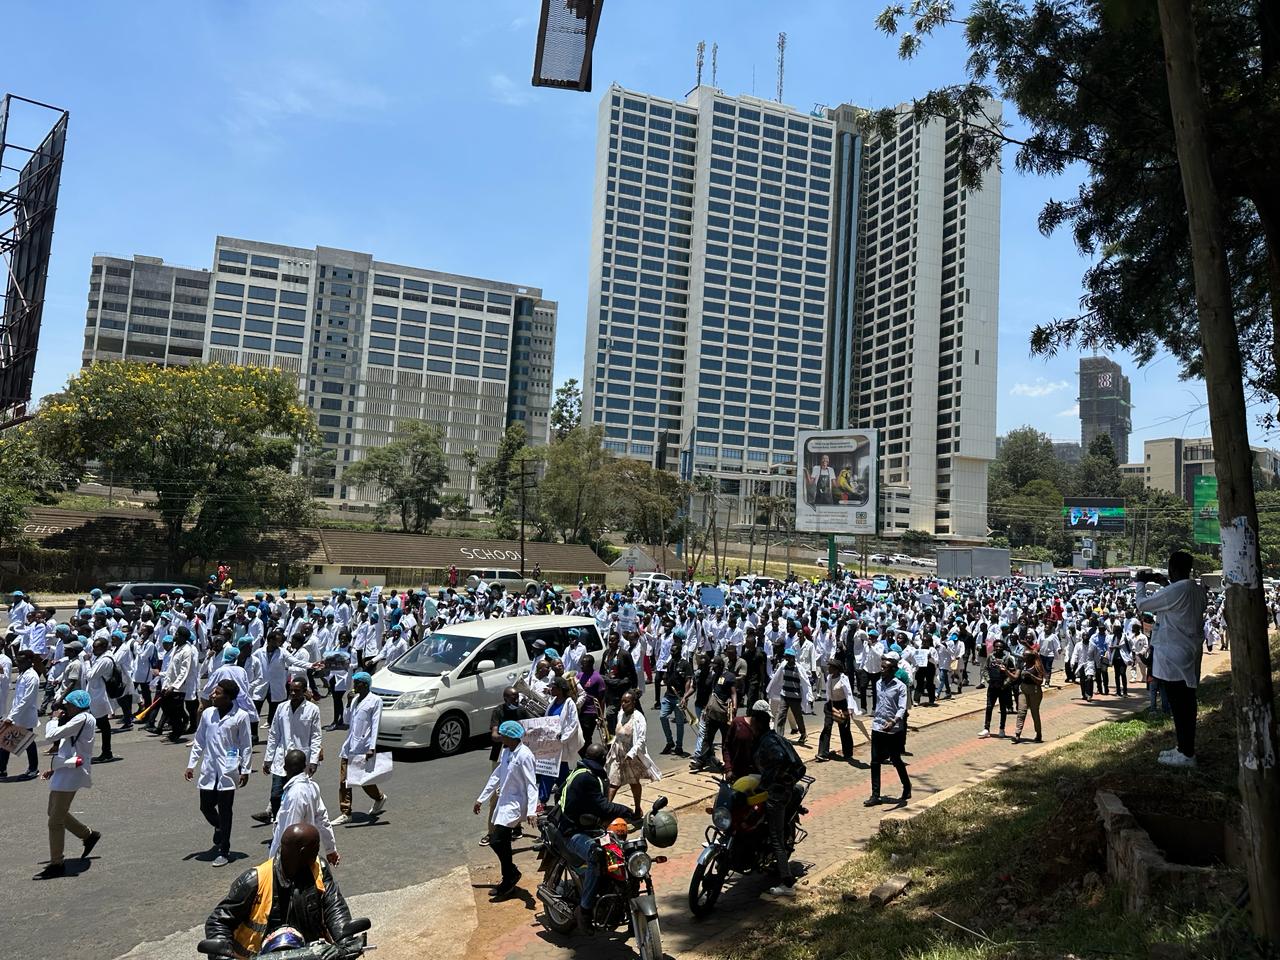 Pain, agony for Kenyans as doctors keep away from hospitals